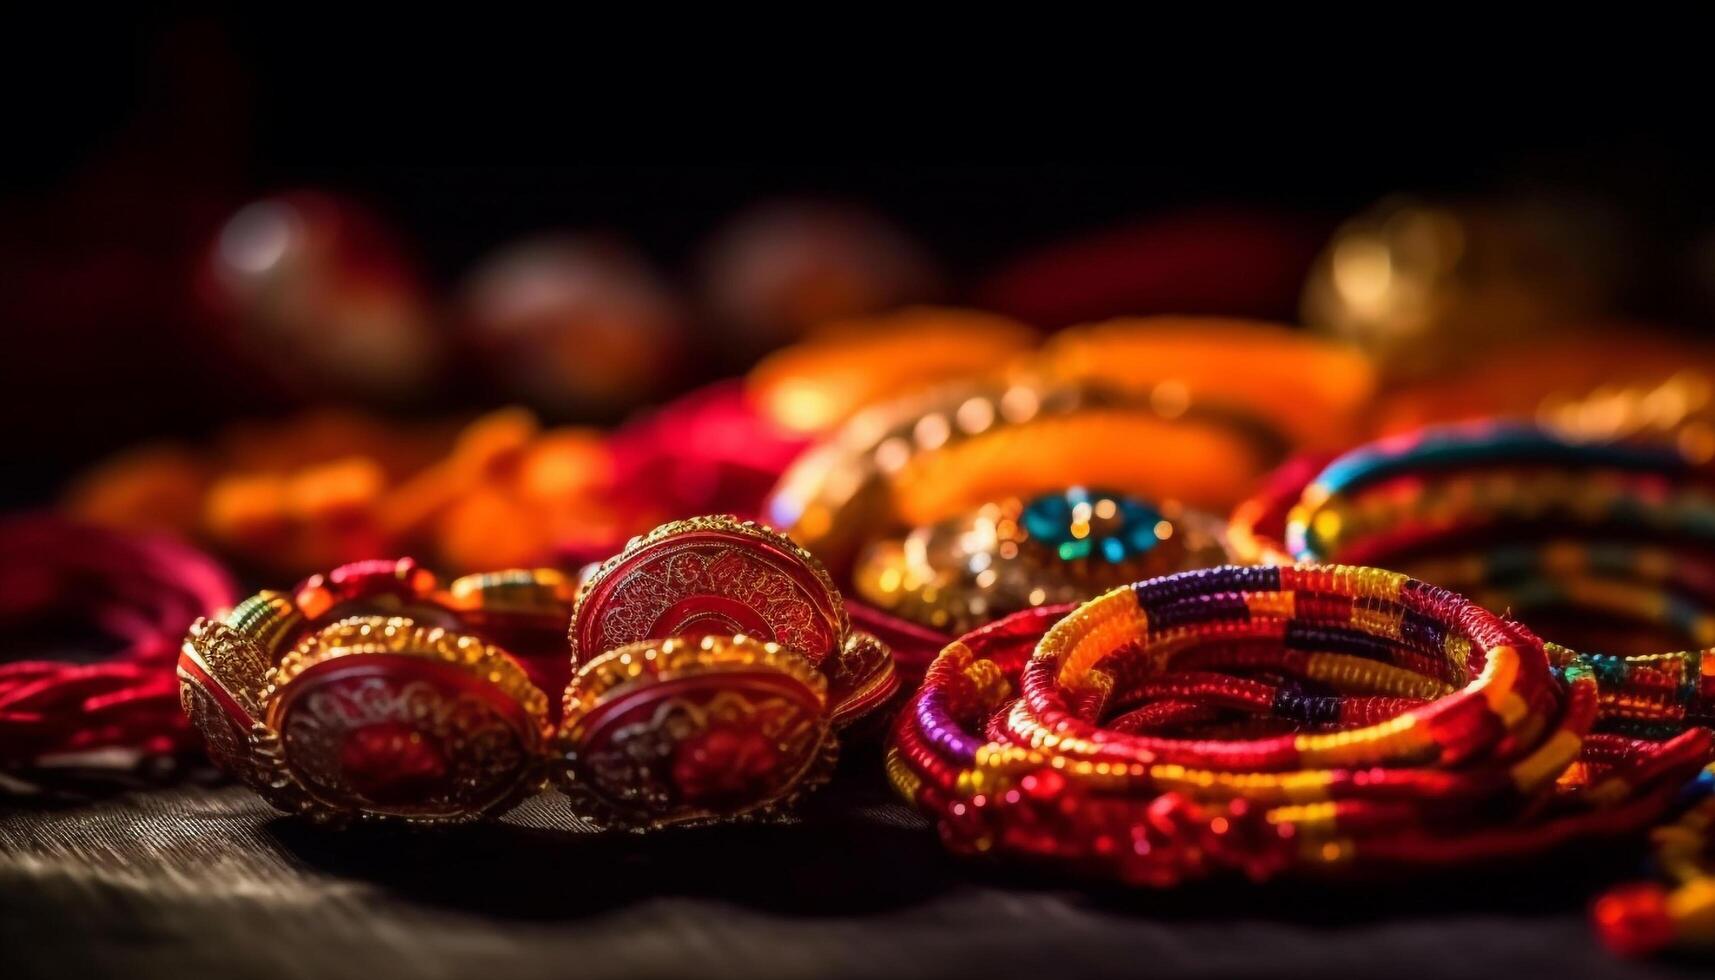 Vibrant Indian jewelry collection showcases ornate bead craft and spirituality generated by AI photo